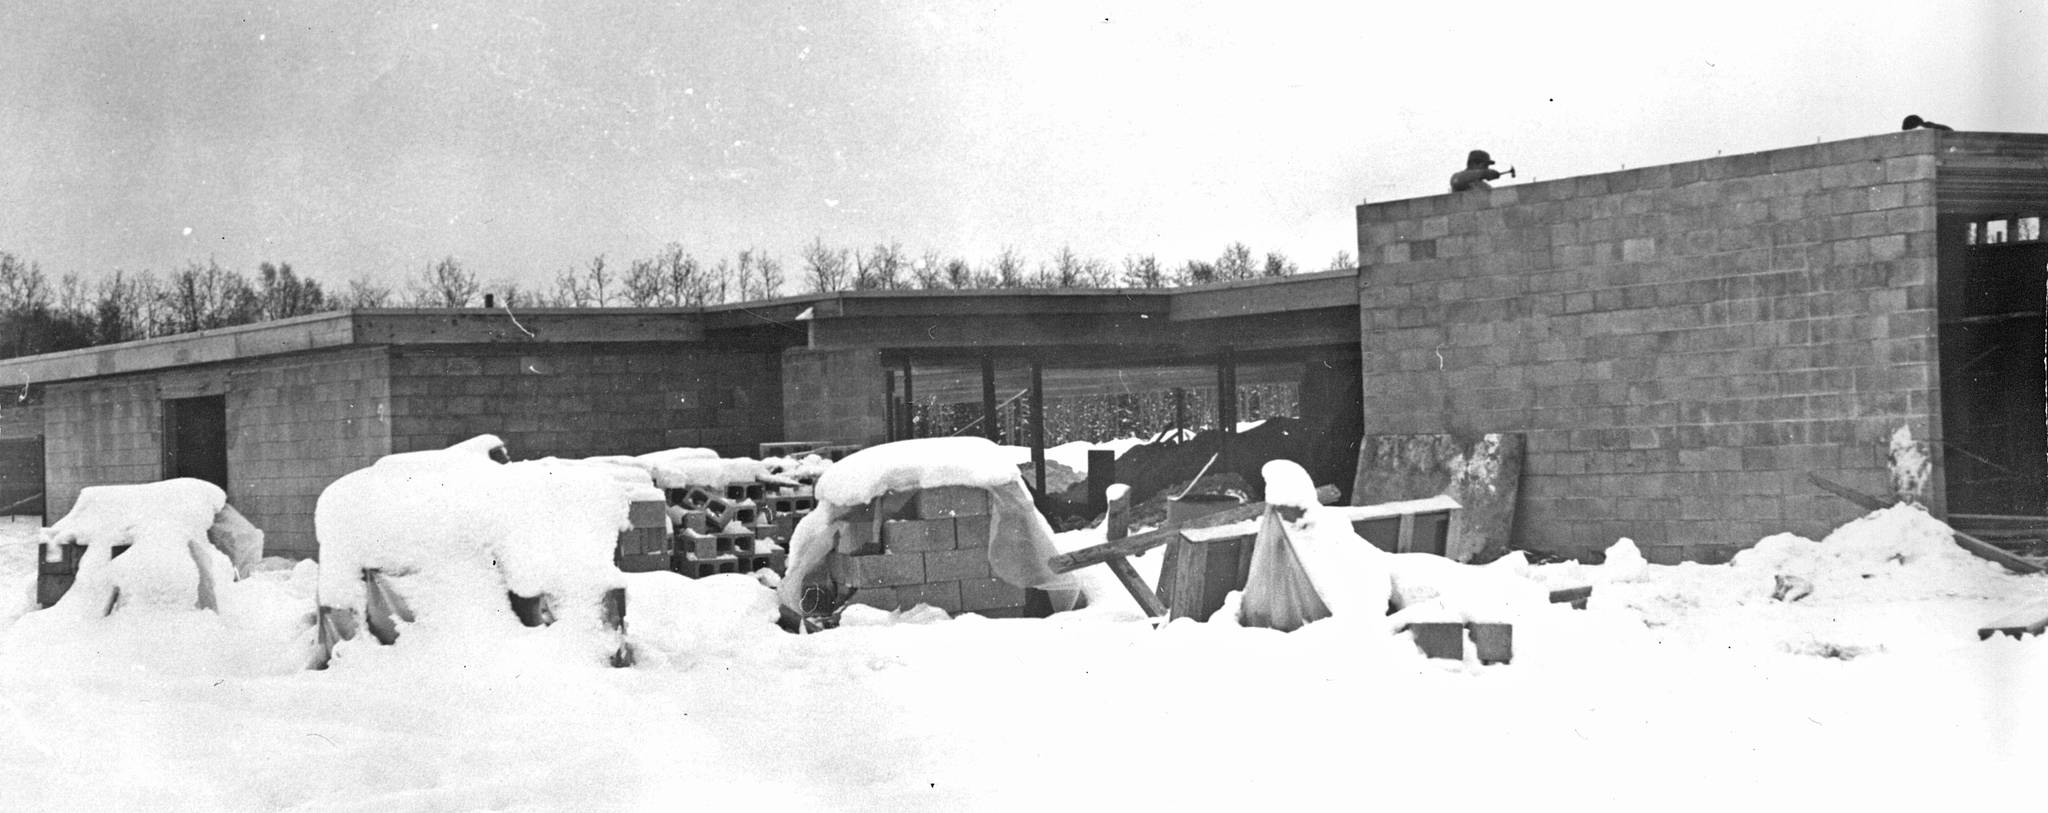 Work on the roof of the new hospital continues during the winter of 1966-67. At this point, the structure is little more than an empty shell built of concrete blocks. (Cheechako News file photo from KPC’s Kenai Peninsula Historical Photo Repository)